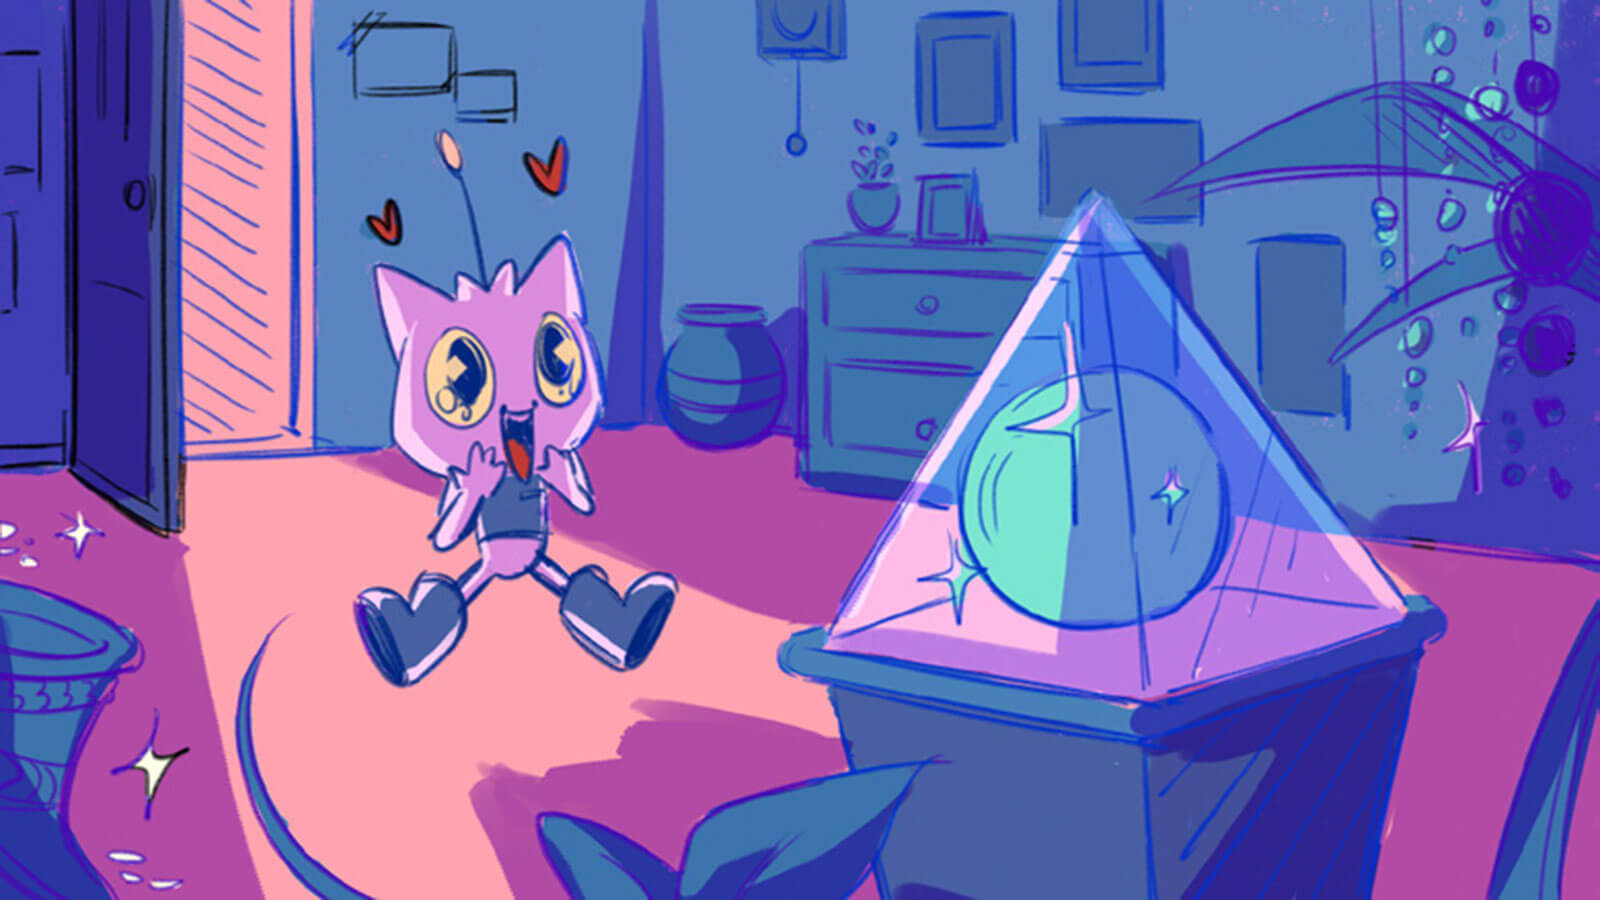 Concept drawing of an alien excitedly encountering a orb in a triangle glass case